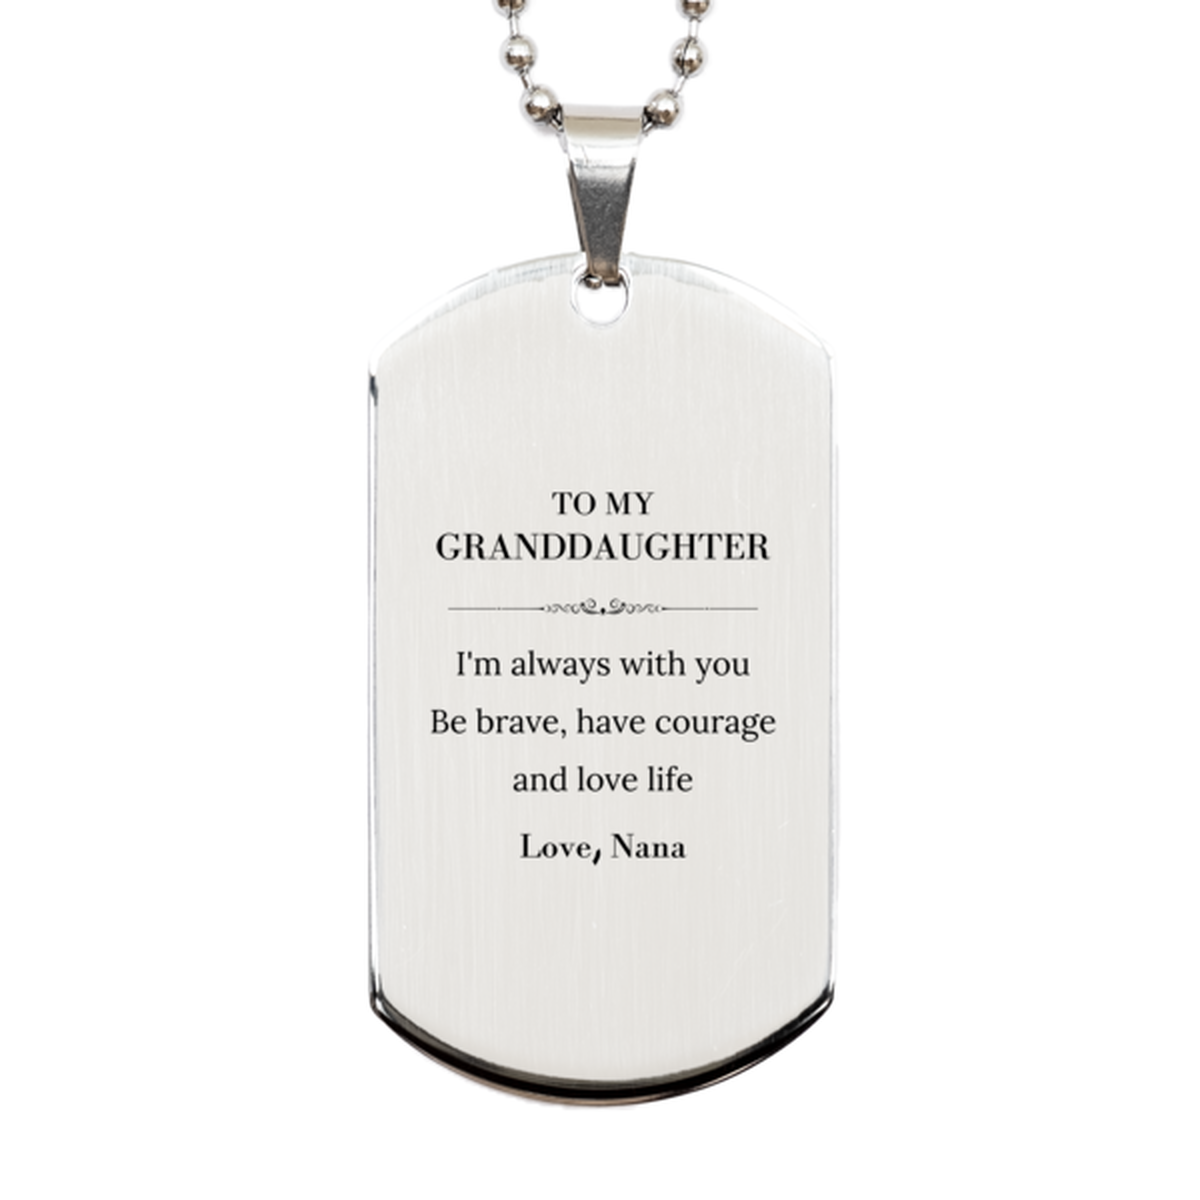 To My Granddaughter Gifts from Nana, Unique Silver Dog Tag Inspirational Christmas Birthday Graduation Gifts for Granddaughter I'm always with you. Be brave, have courage and love life. Love, Nana